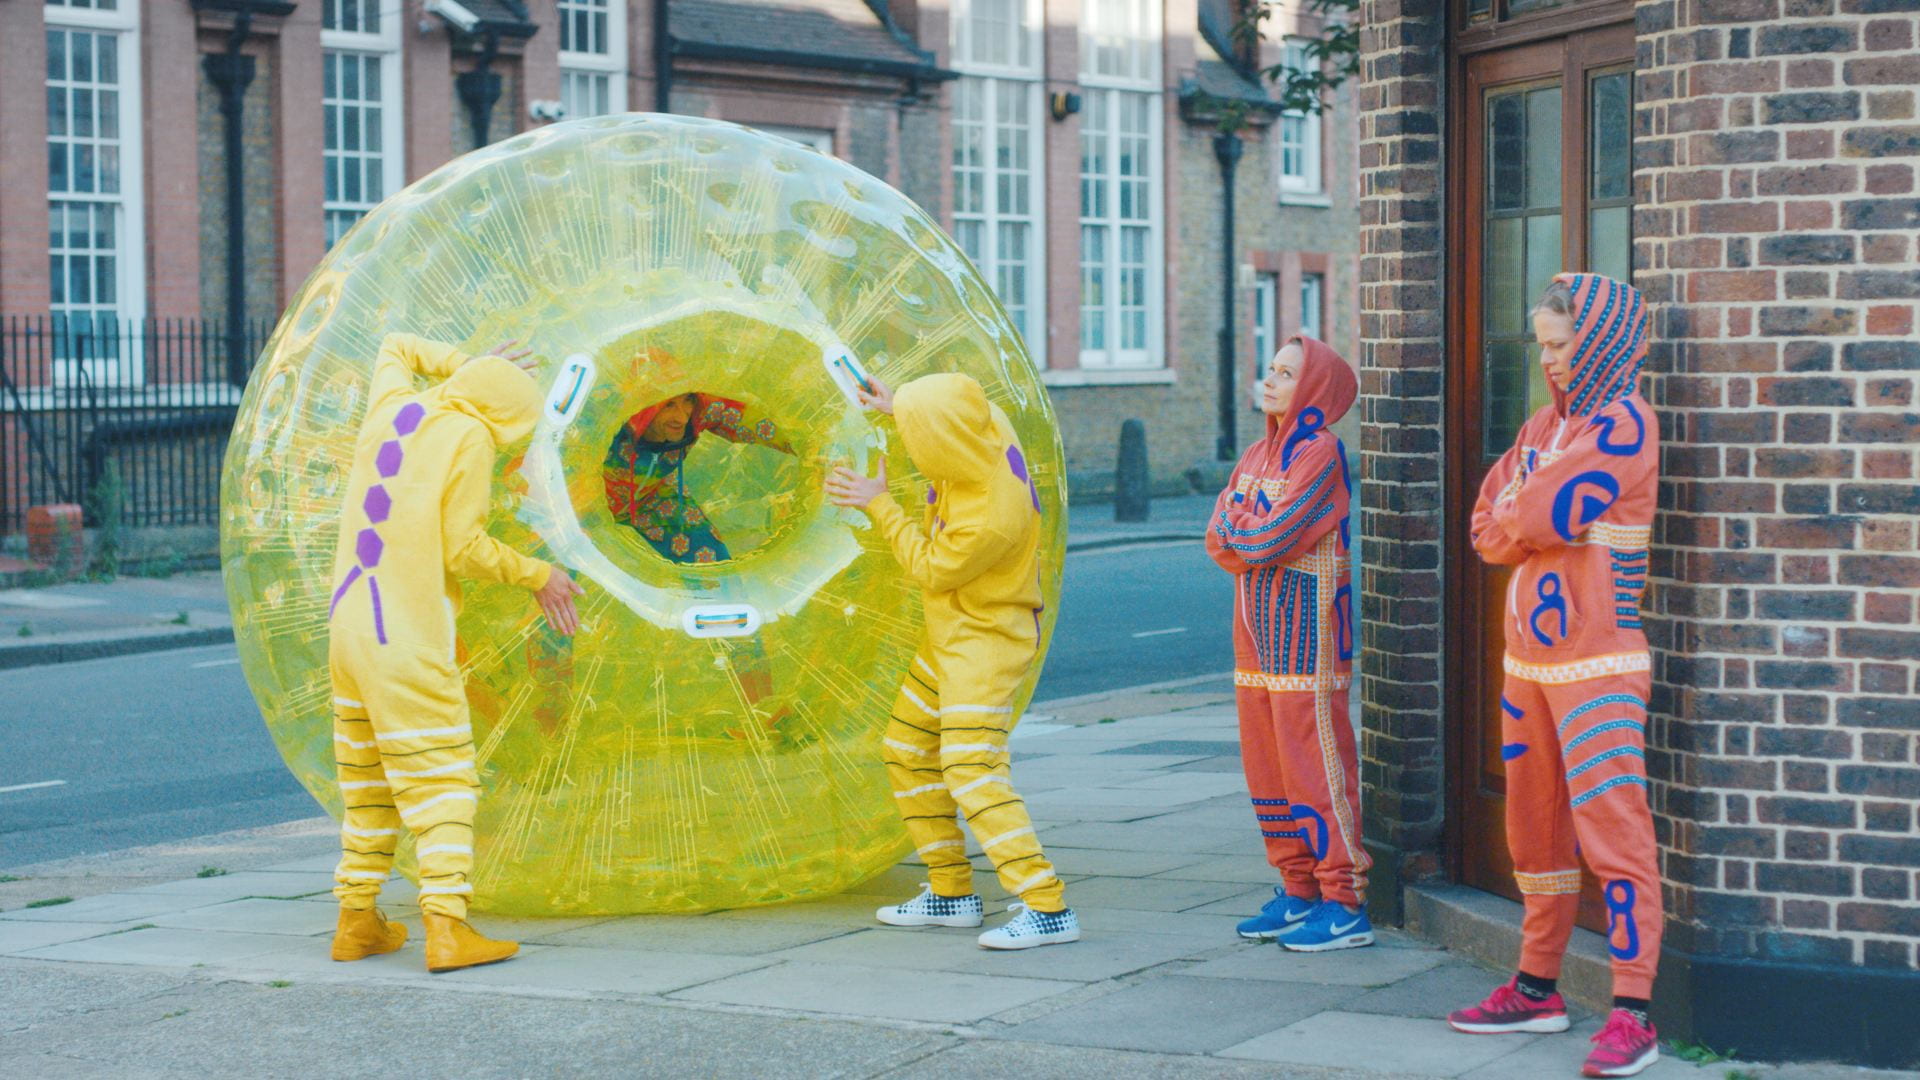 A person in a yellow inflatable zorb ball attempts to gain access to a bar, guarded by two people dressed in orange and blue onesies. The overall scene parodies the way viruses stealthily enter and infect a person's immune system.